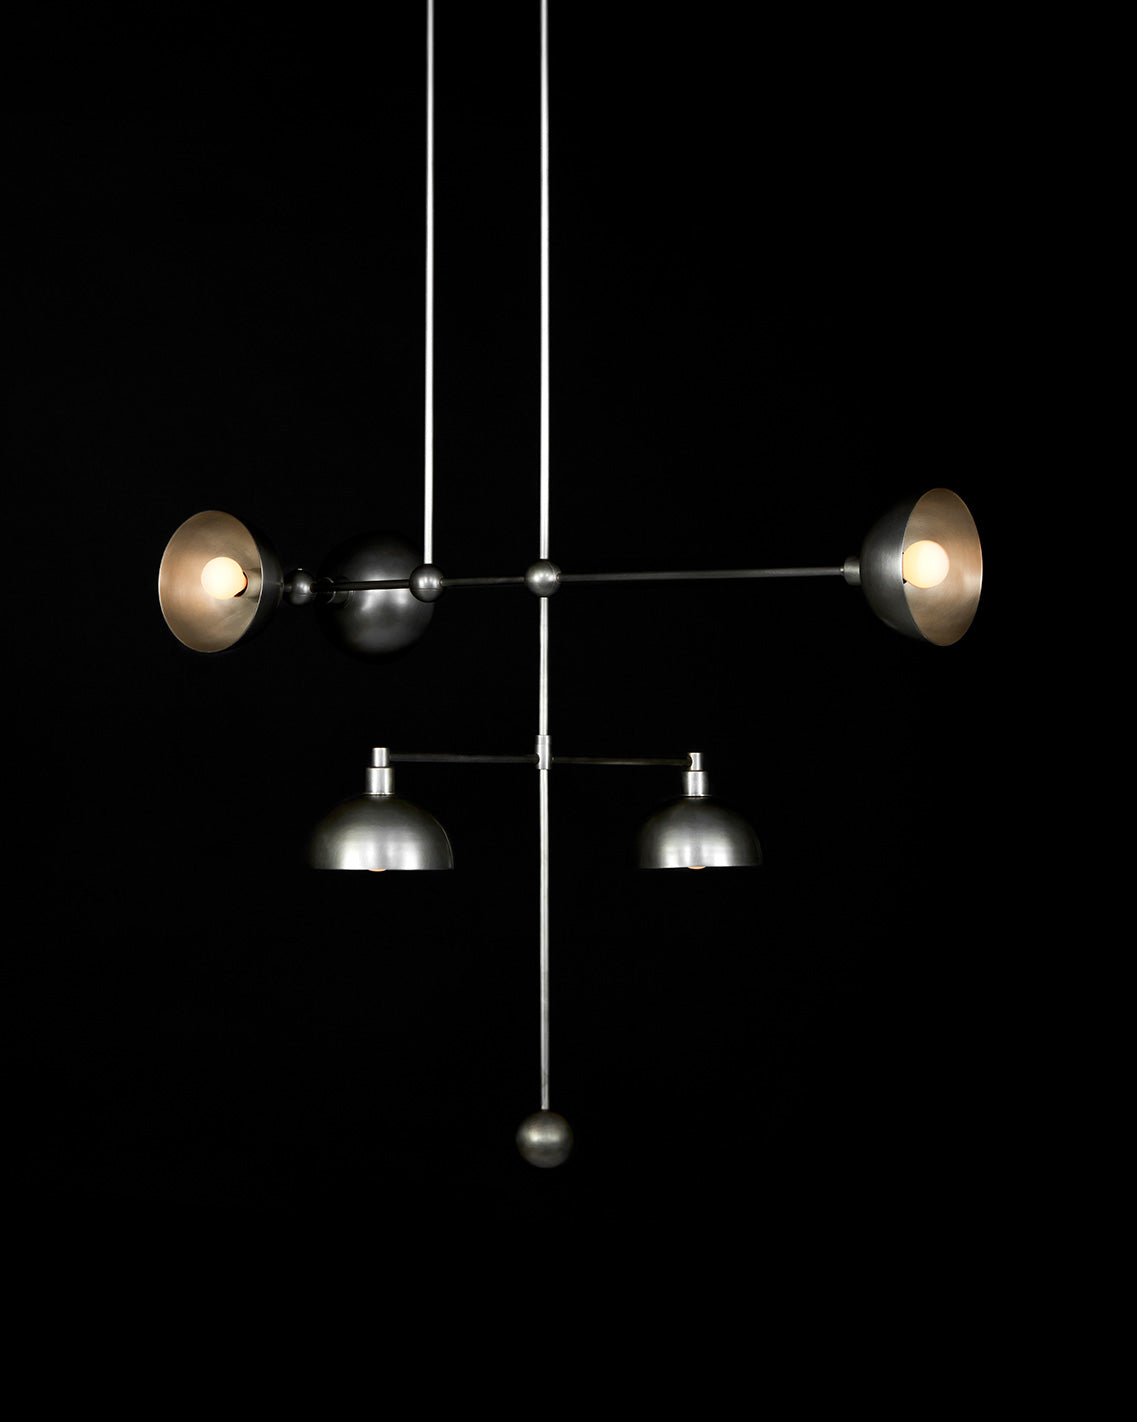 TRAPEZE : 5 MOBILE ceiling pendant in Tarnished Silver finish, hanging against a black background. 